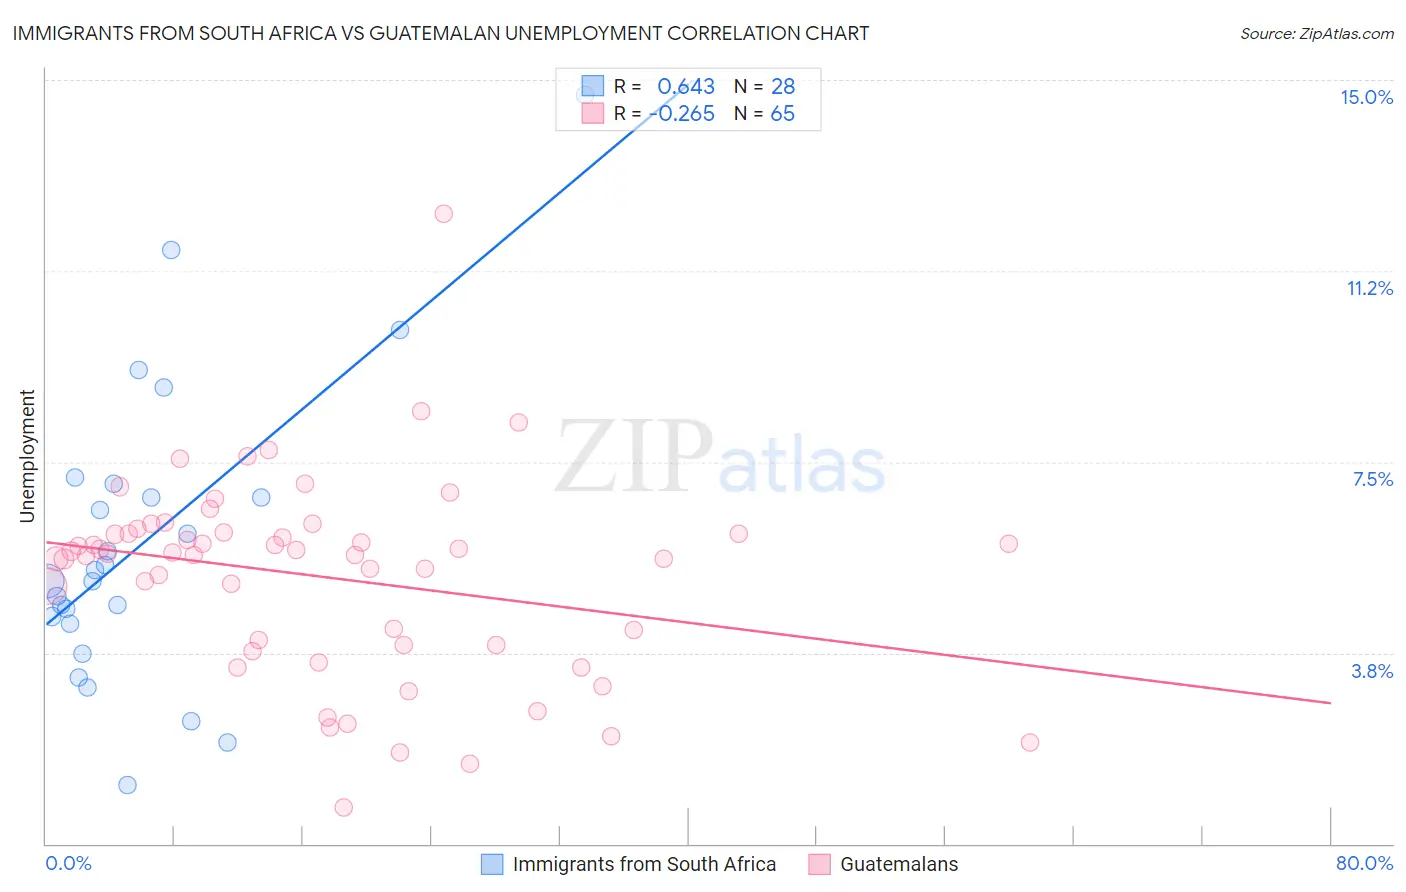 Immigrants from South Africa vs Guatemalan Unemployment